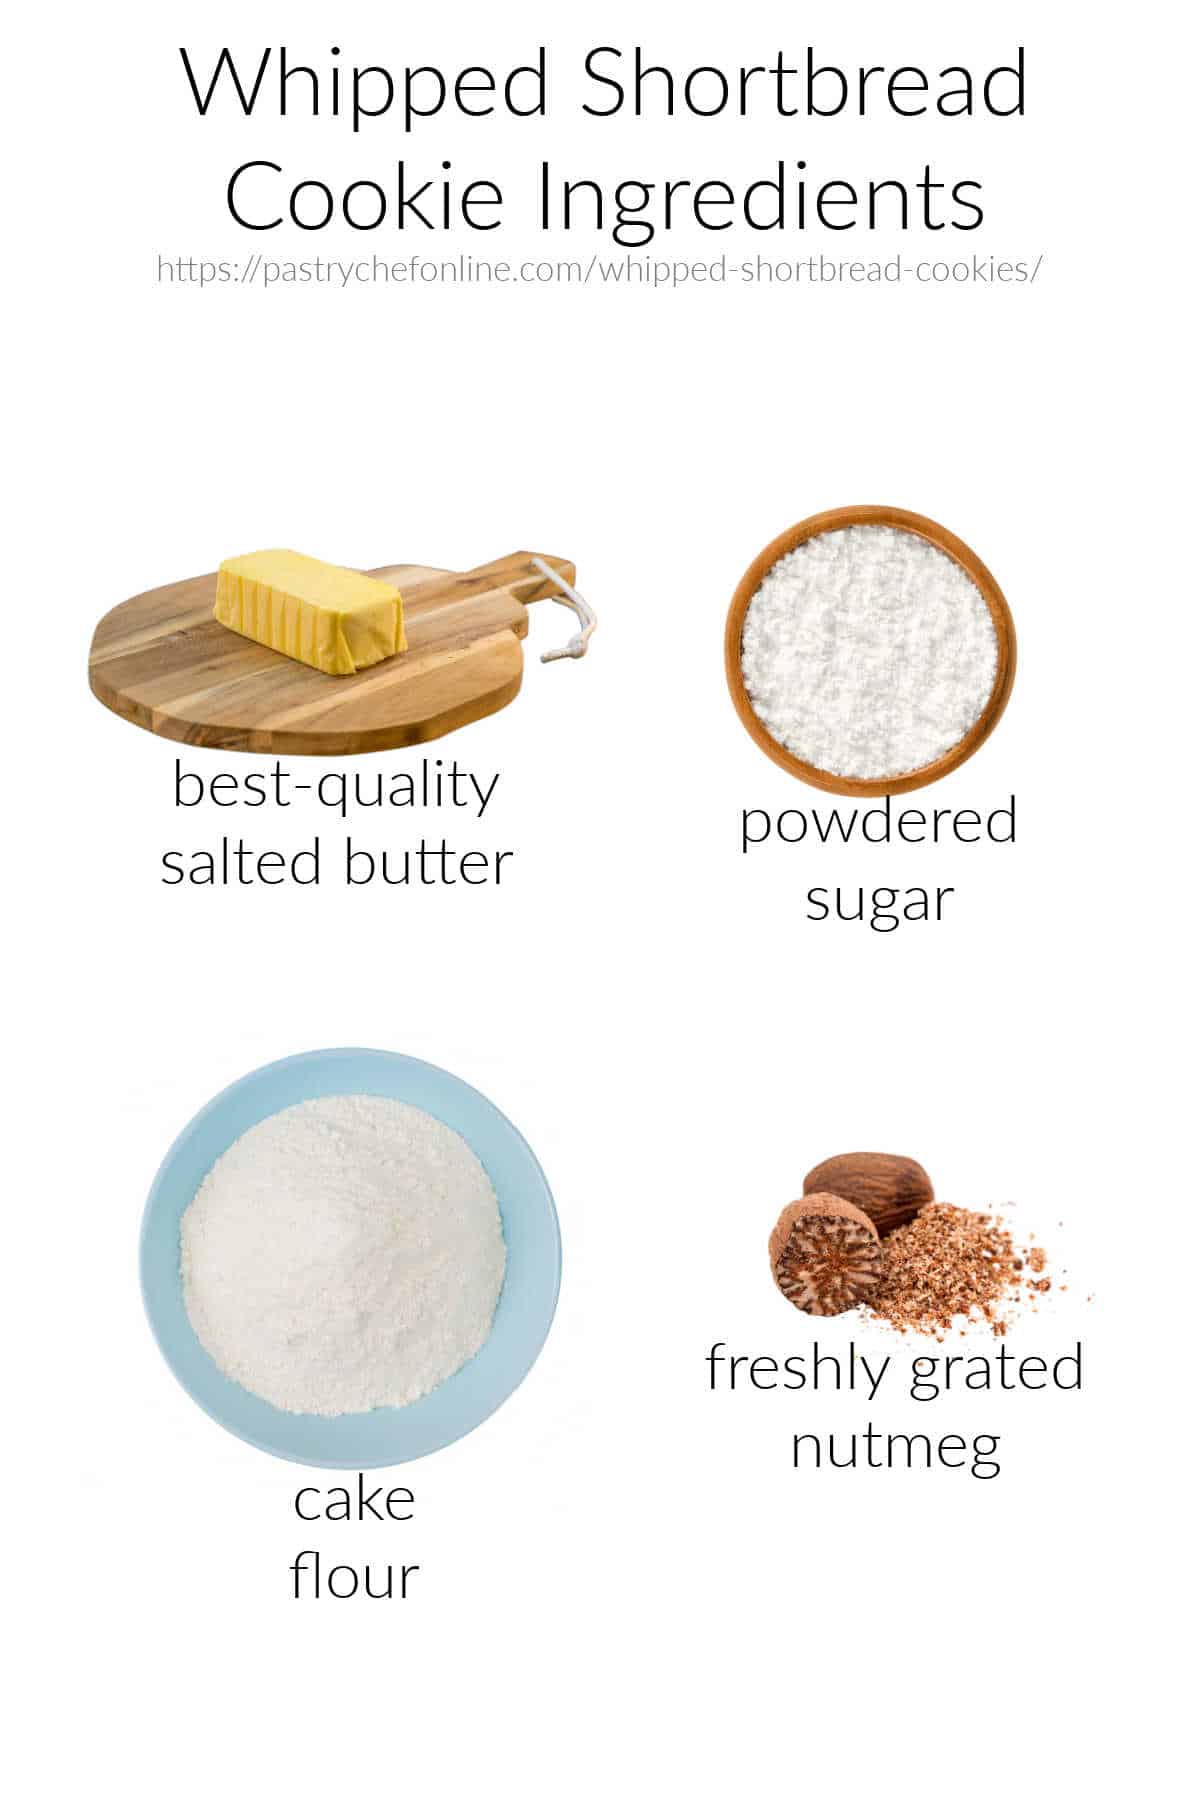 Labeled images of salted butter, powdered sugar, cake flour, and nutmeg on a white background.